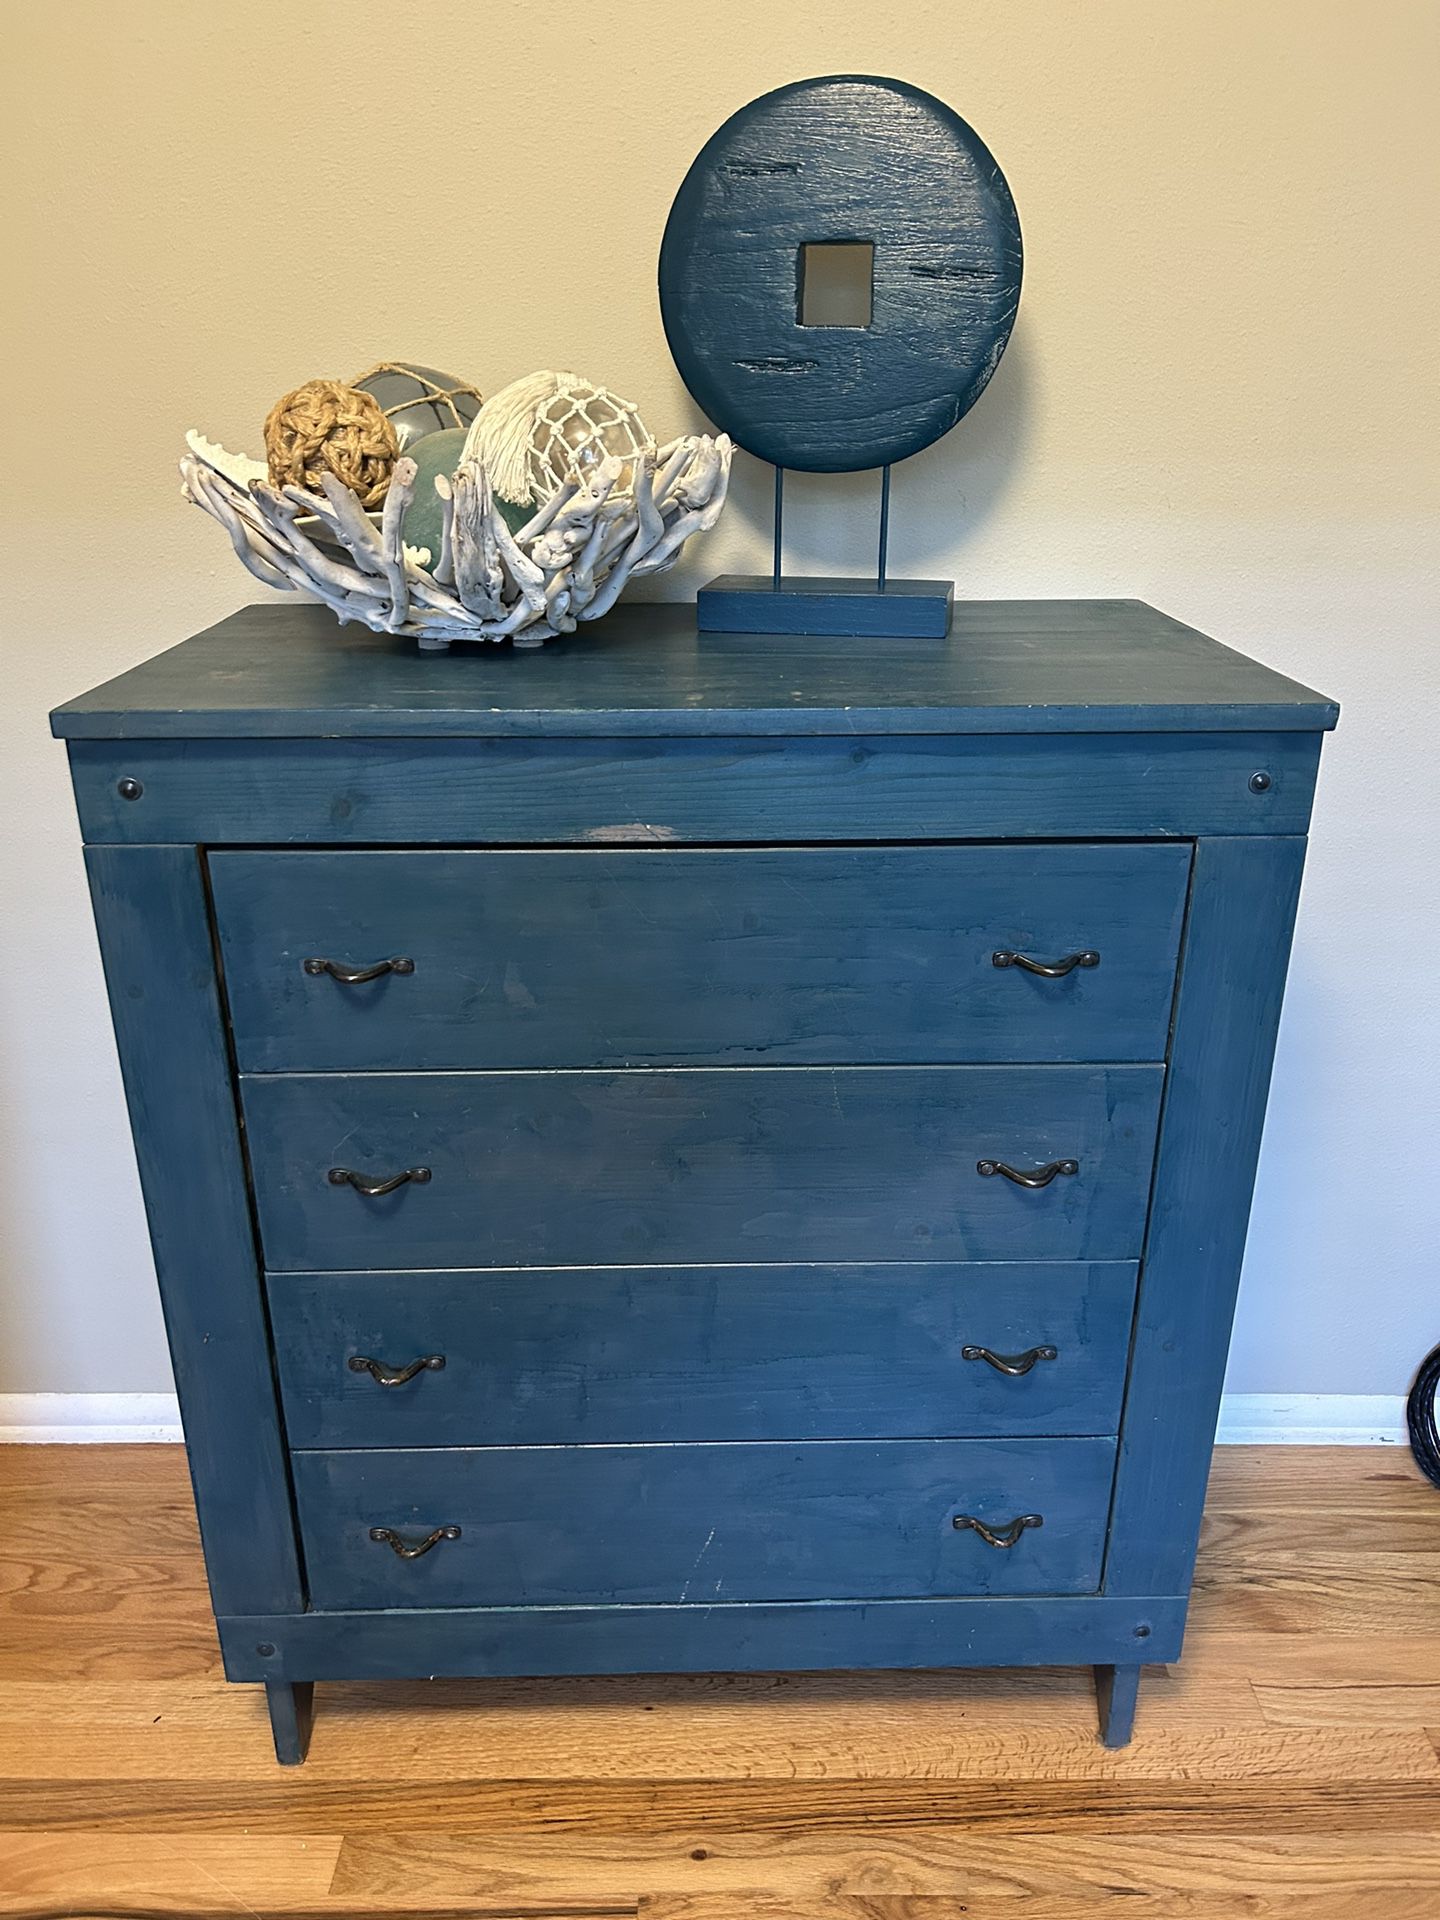  Adorable All-Wood 4-Drawer Dresser in Water-Washed Teal